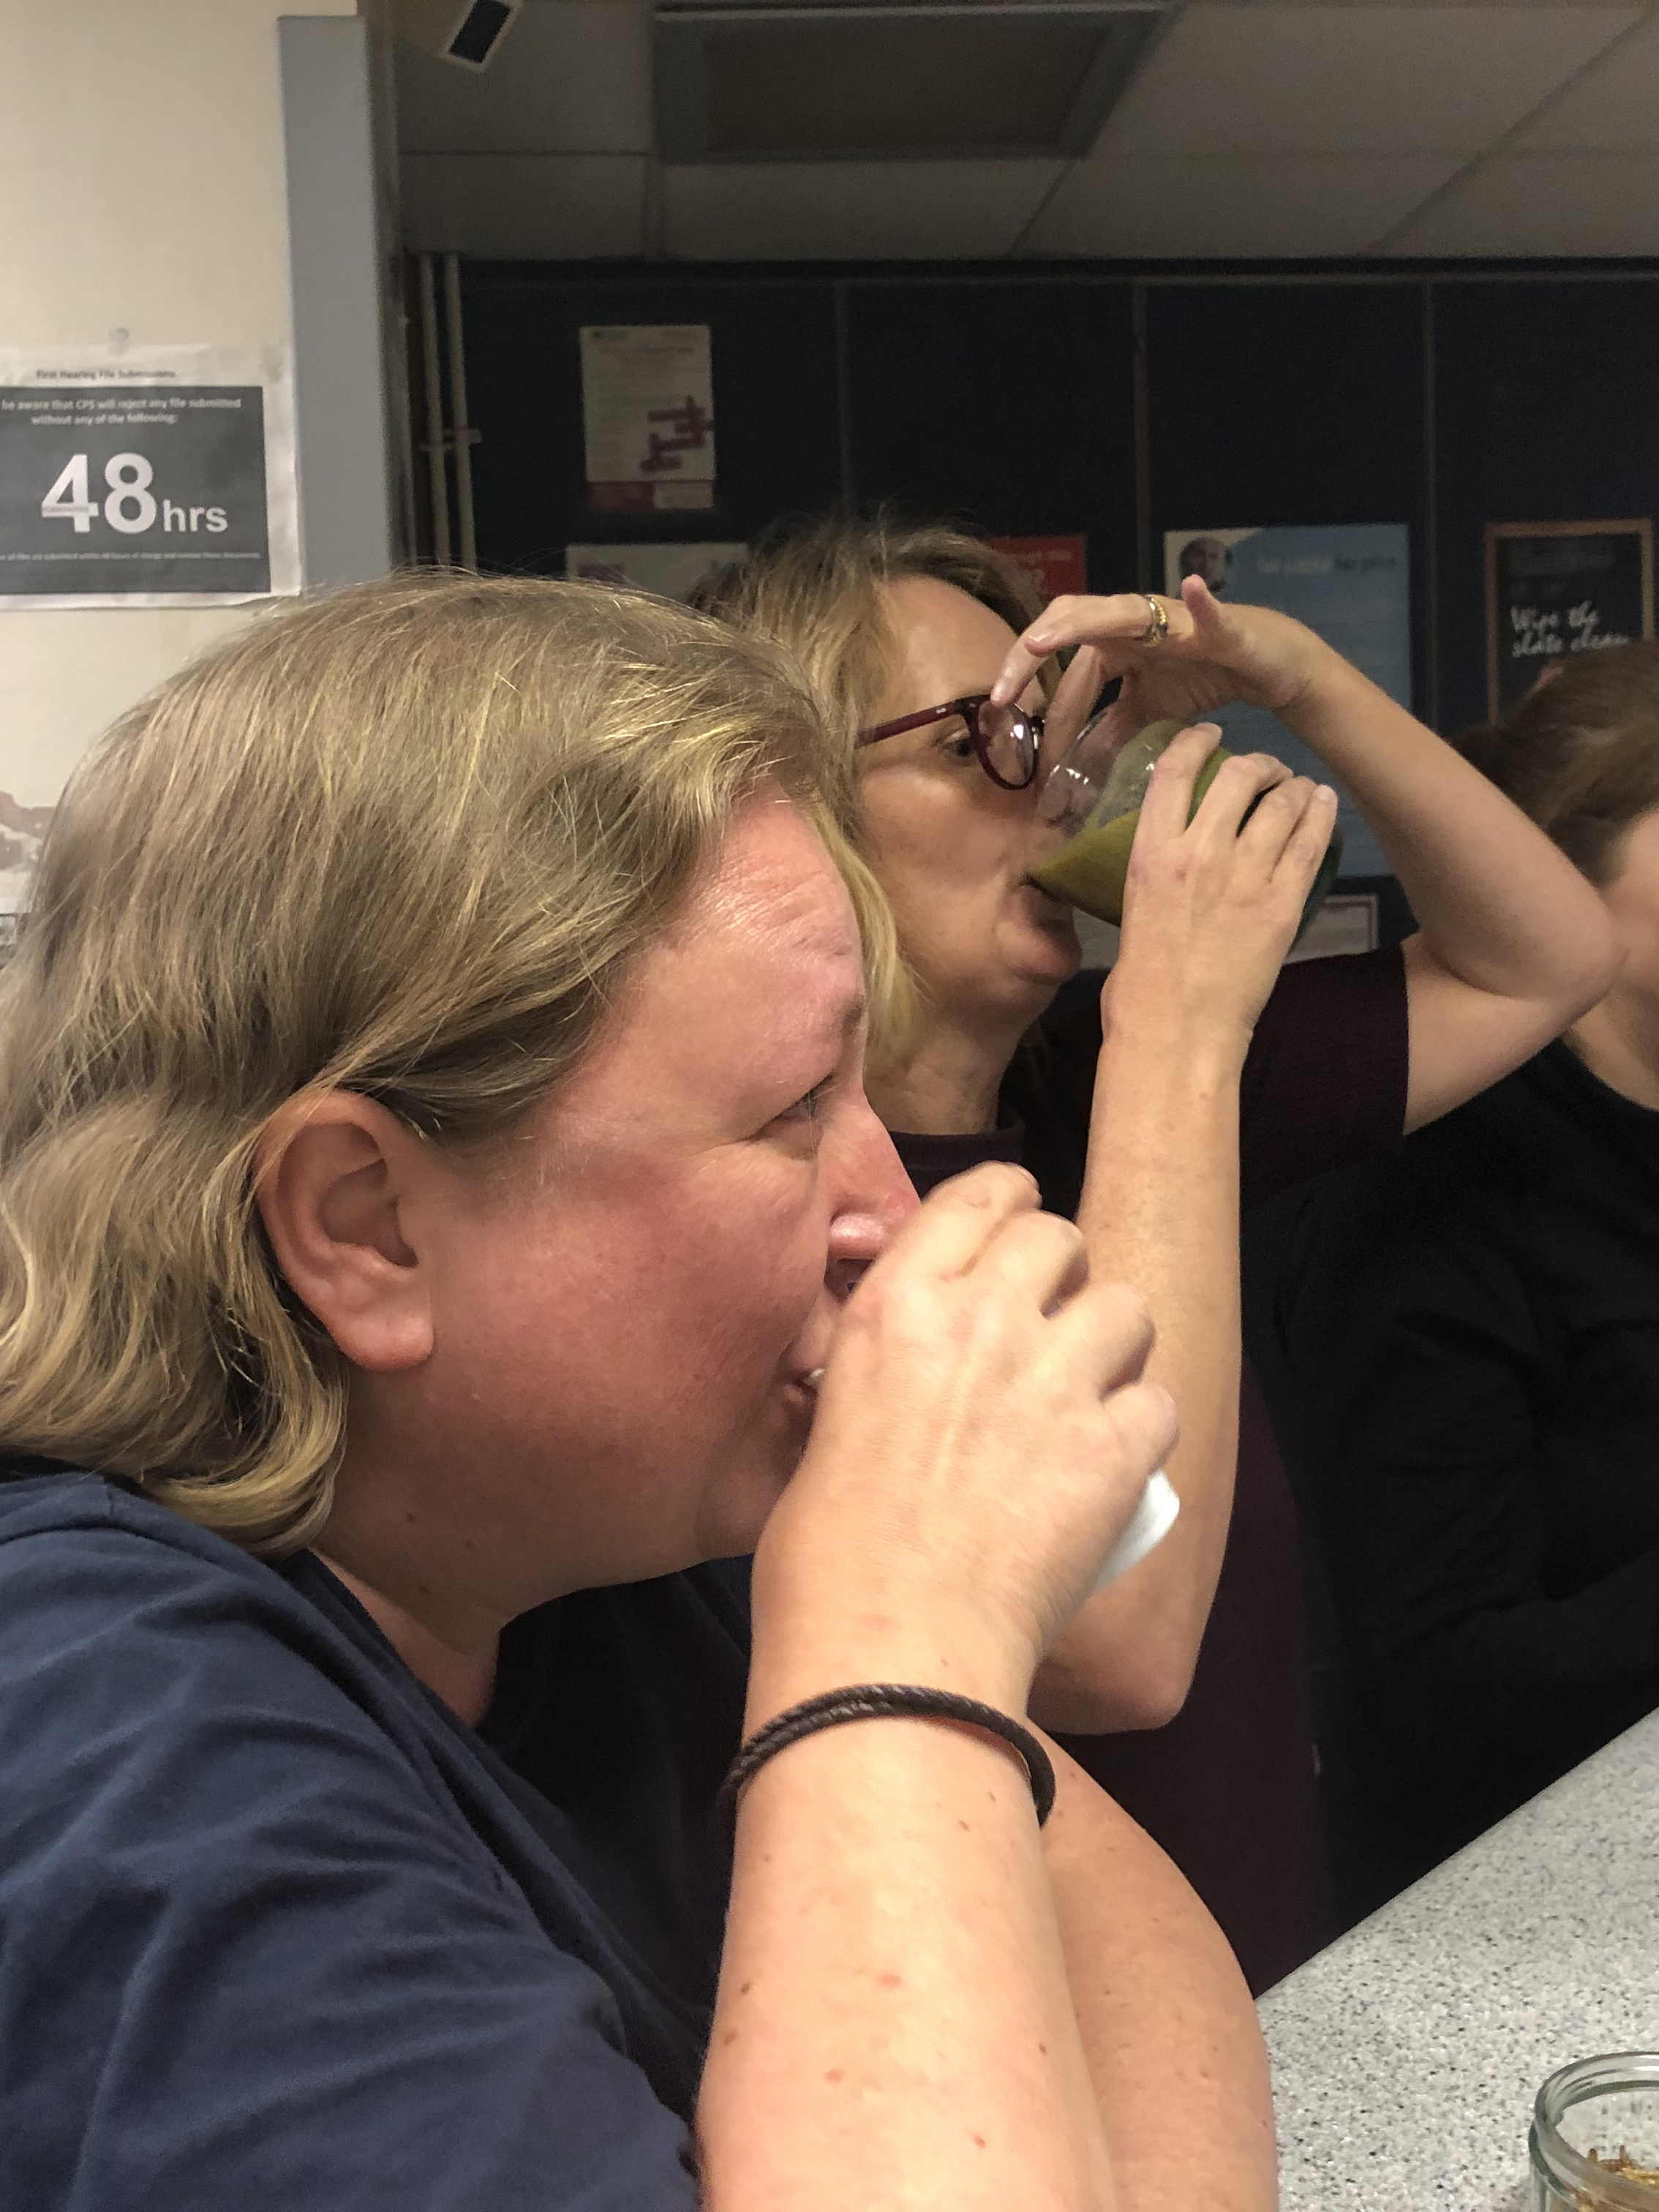 Two people are taking part in a 'gross' challenge, one person is eating dry worms and the other is holding her nose while drinking a gross smoothie